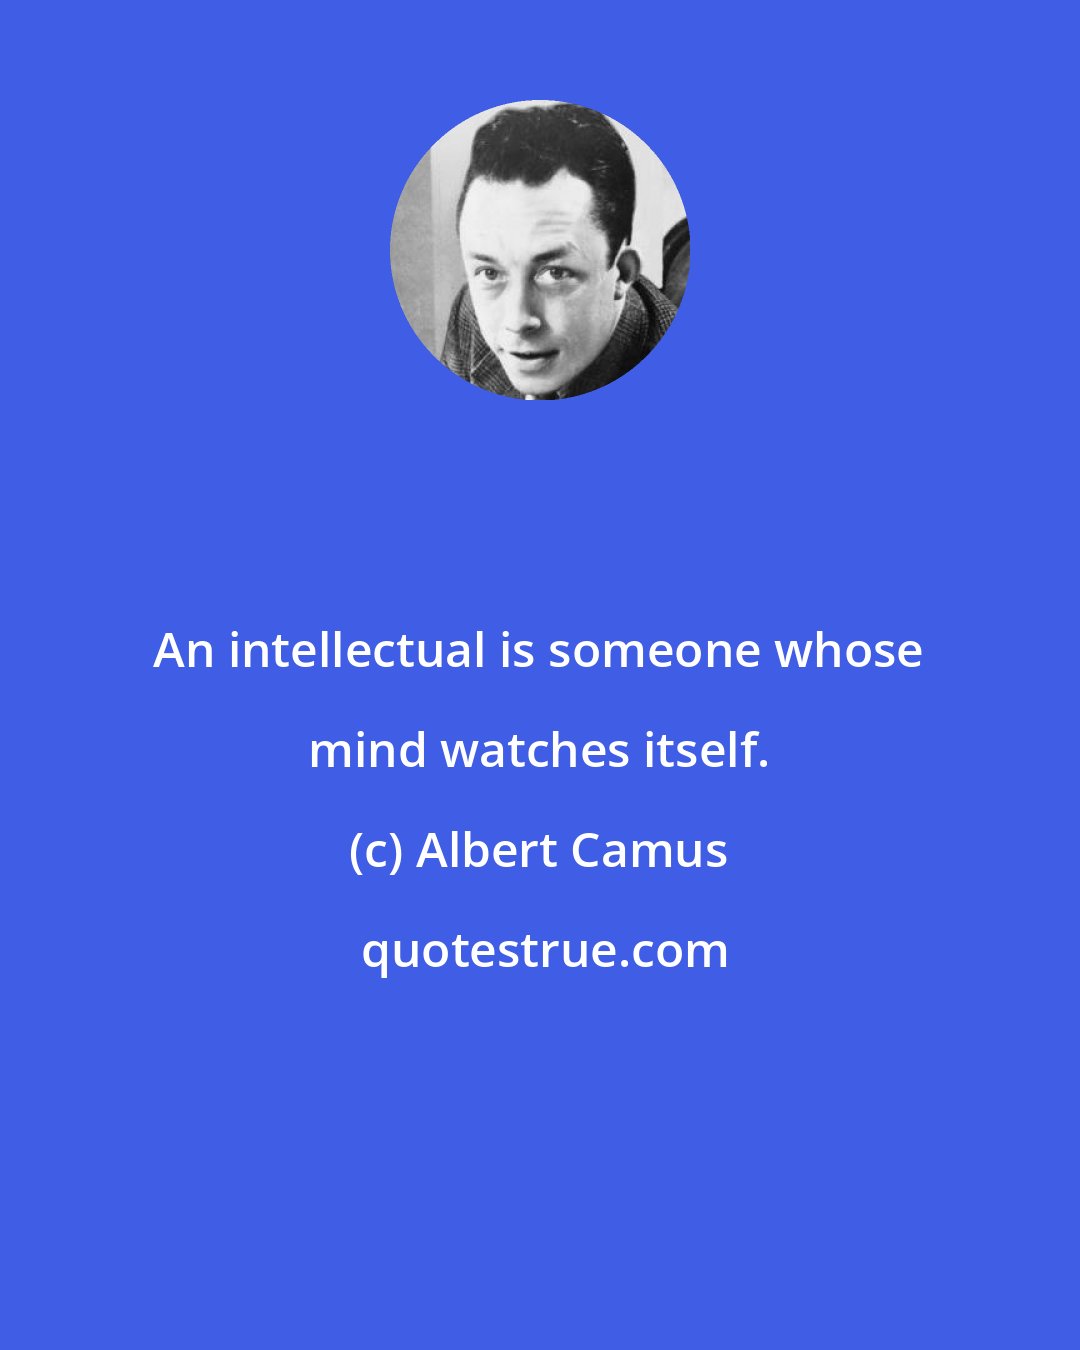 Albert Camus: An intellectual is someone whose mind watches itself.